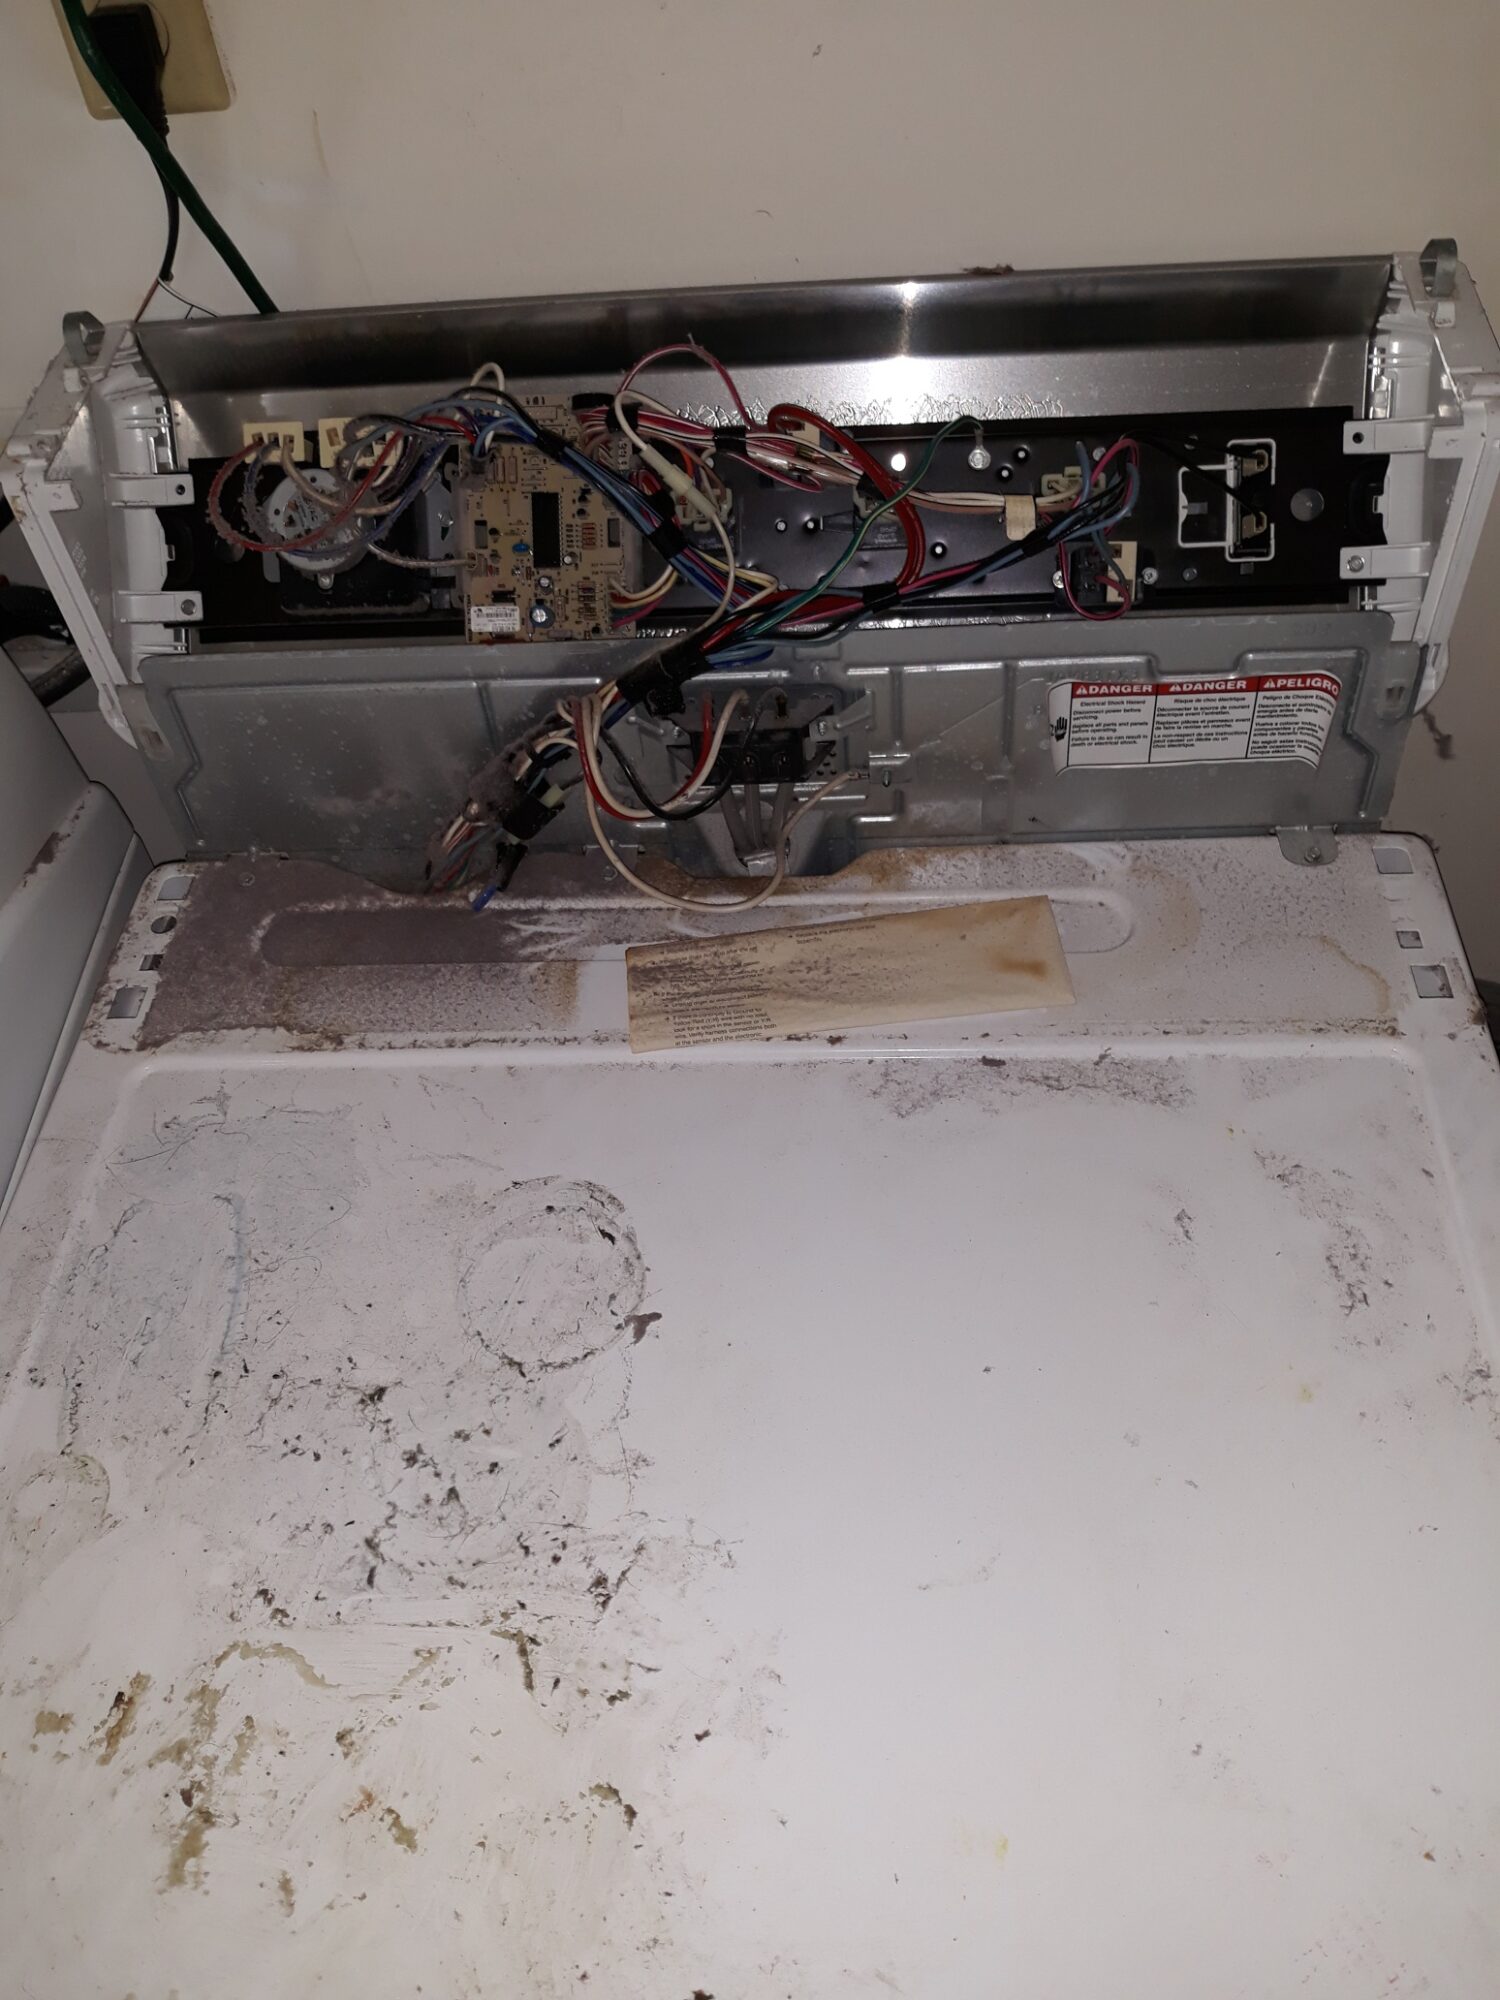 appliance repair dryer repair repair require replacement of the failed control timer that has internal contact damage ne 17th ave ocala fl 34470